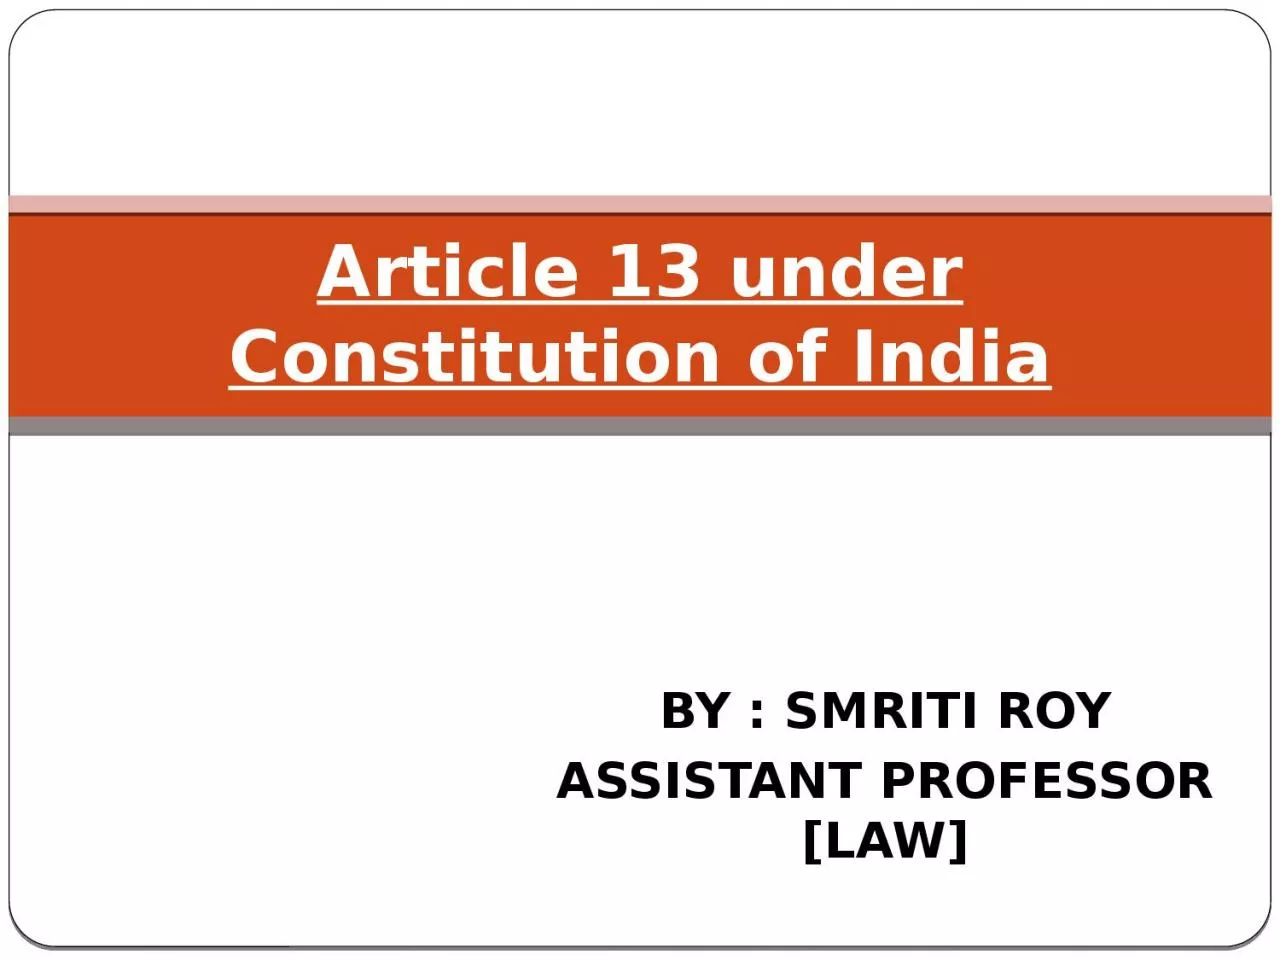 BY : SMRITI ROY ASSISTANT PROFESSOR [LAW]